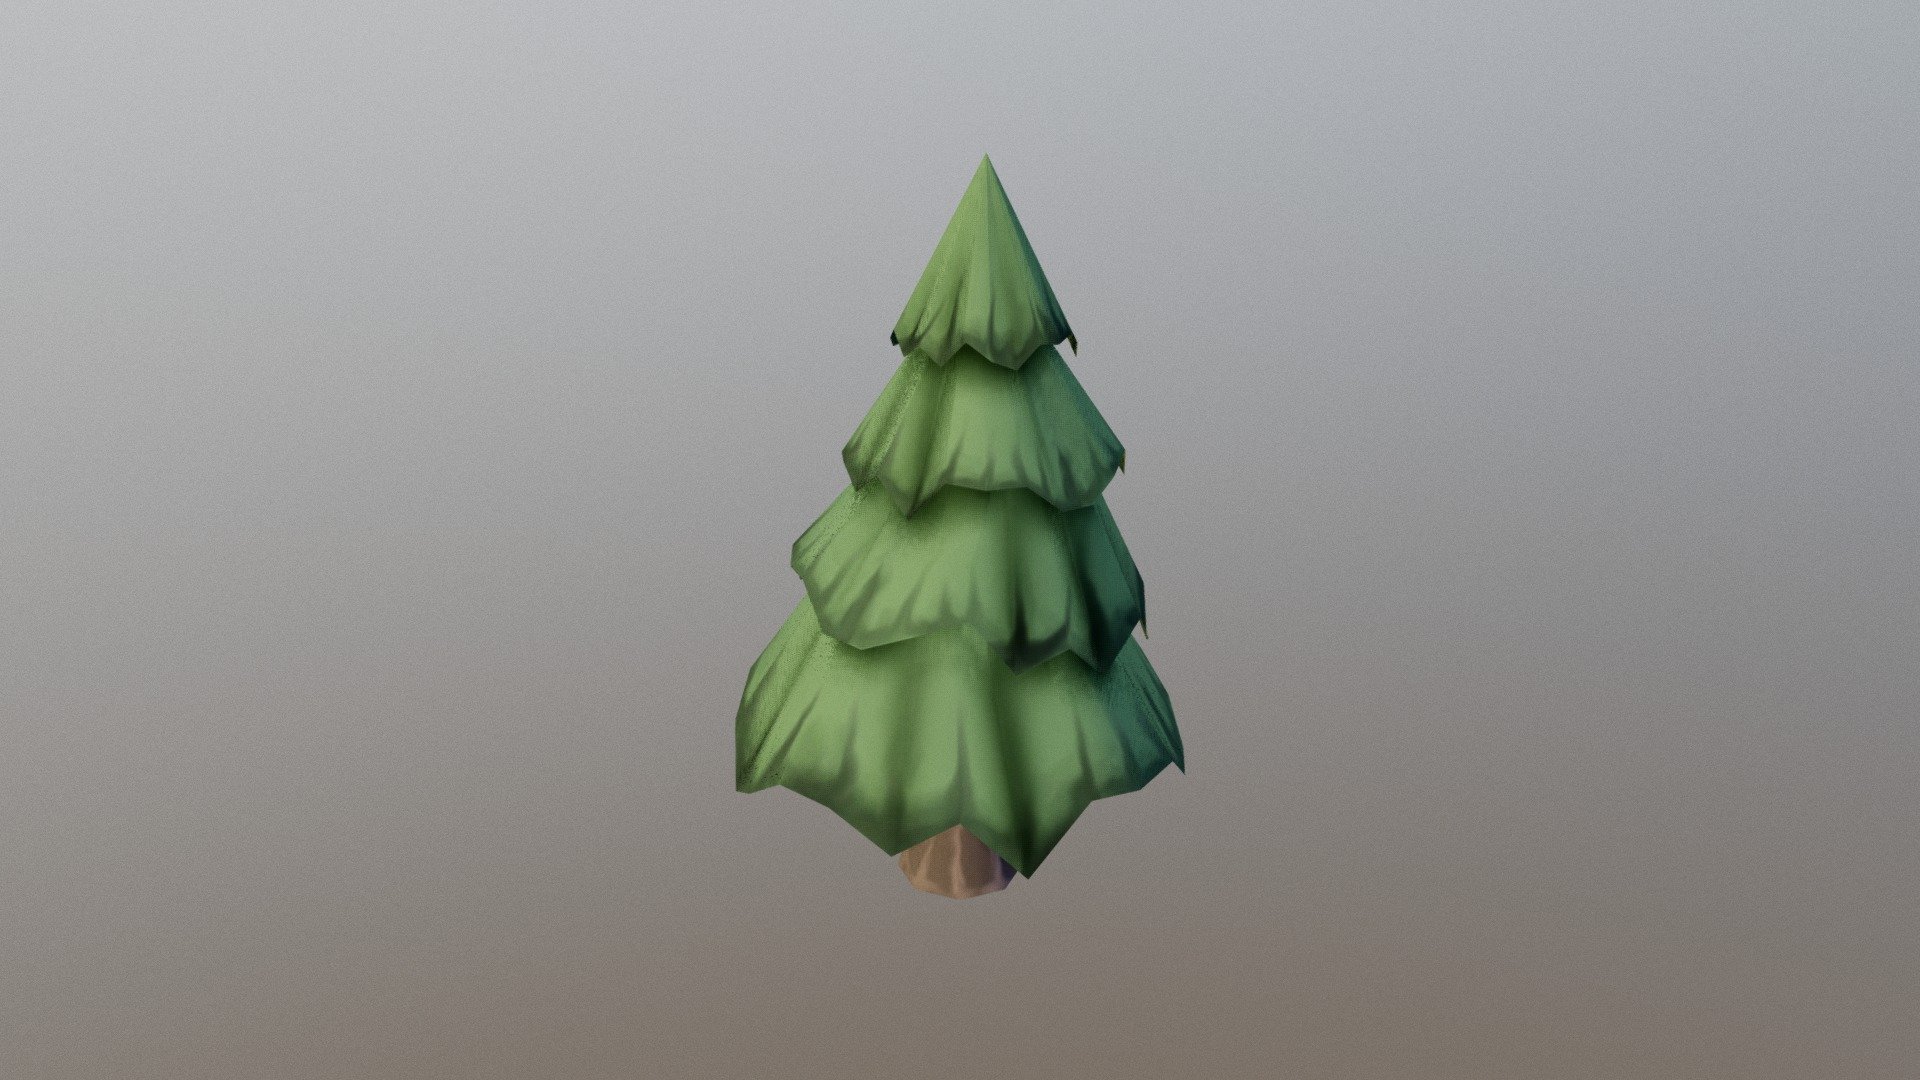 This is a quick 30-45 minute asset mockup practice I did late one night. Figured I would share it if anybody wanted to use it. You can download it here under a CC-0 license: https://www.blendswap.com/blends/view/90520 - Stylized Painted Tree - 3D model by J.W. Sargent (@jwsargent) 3d model